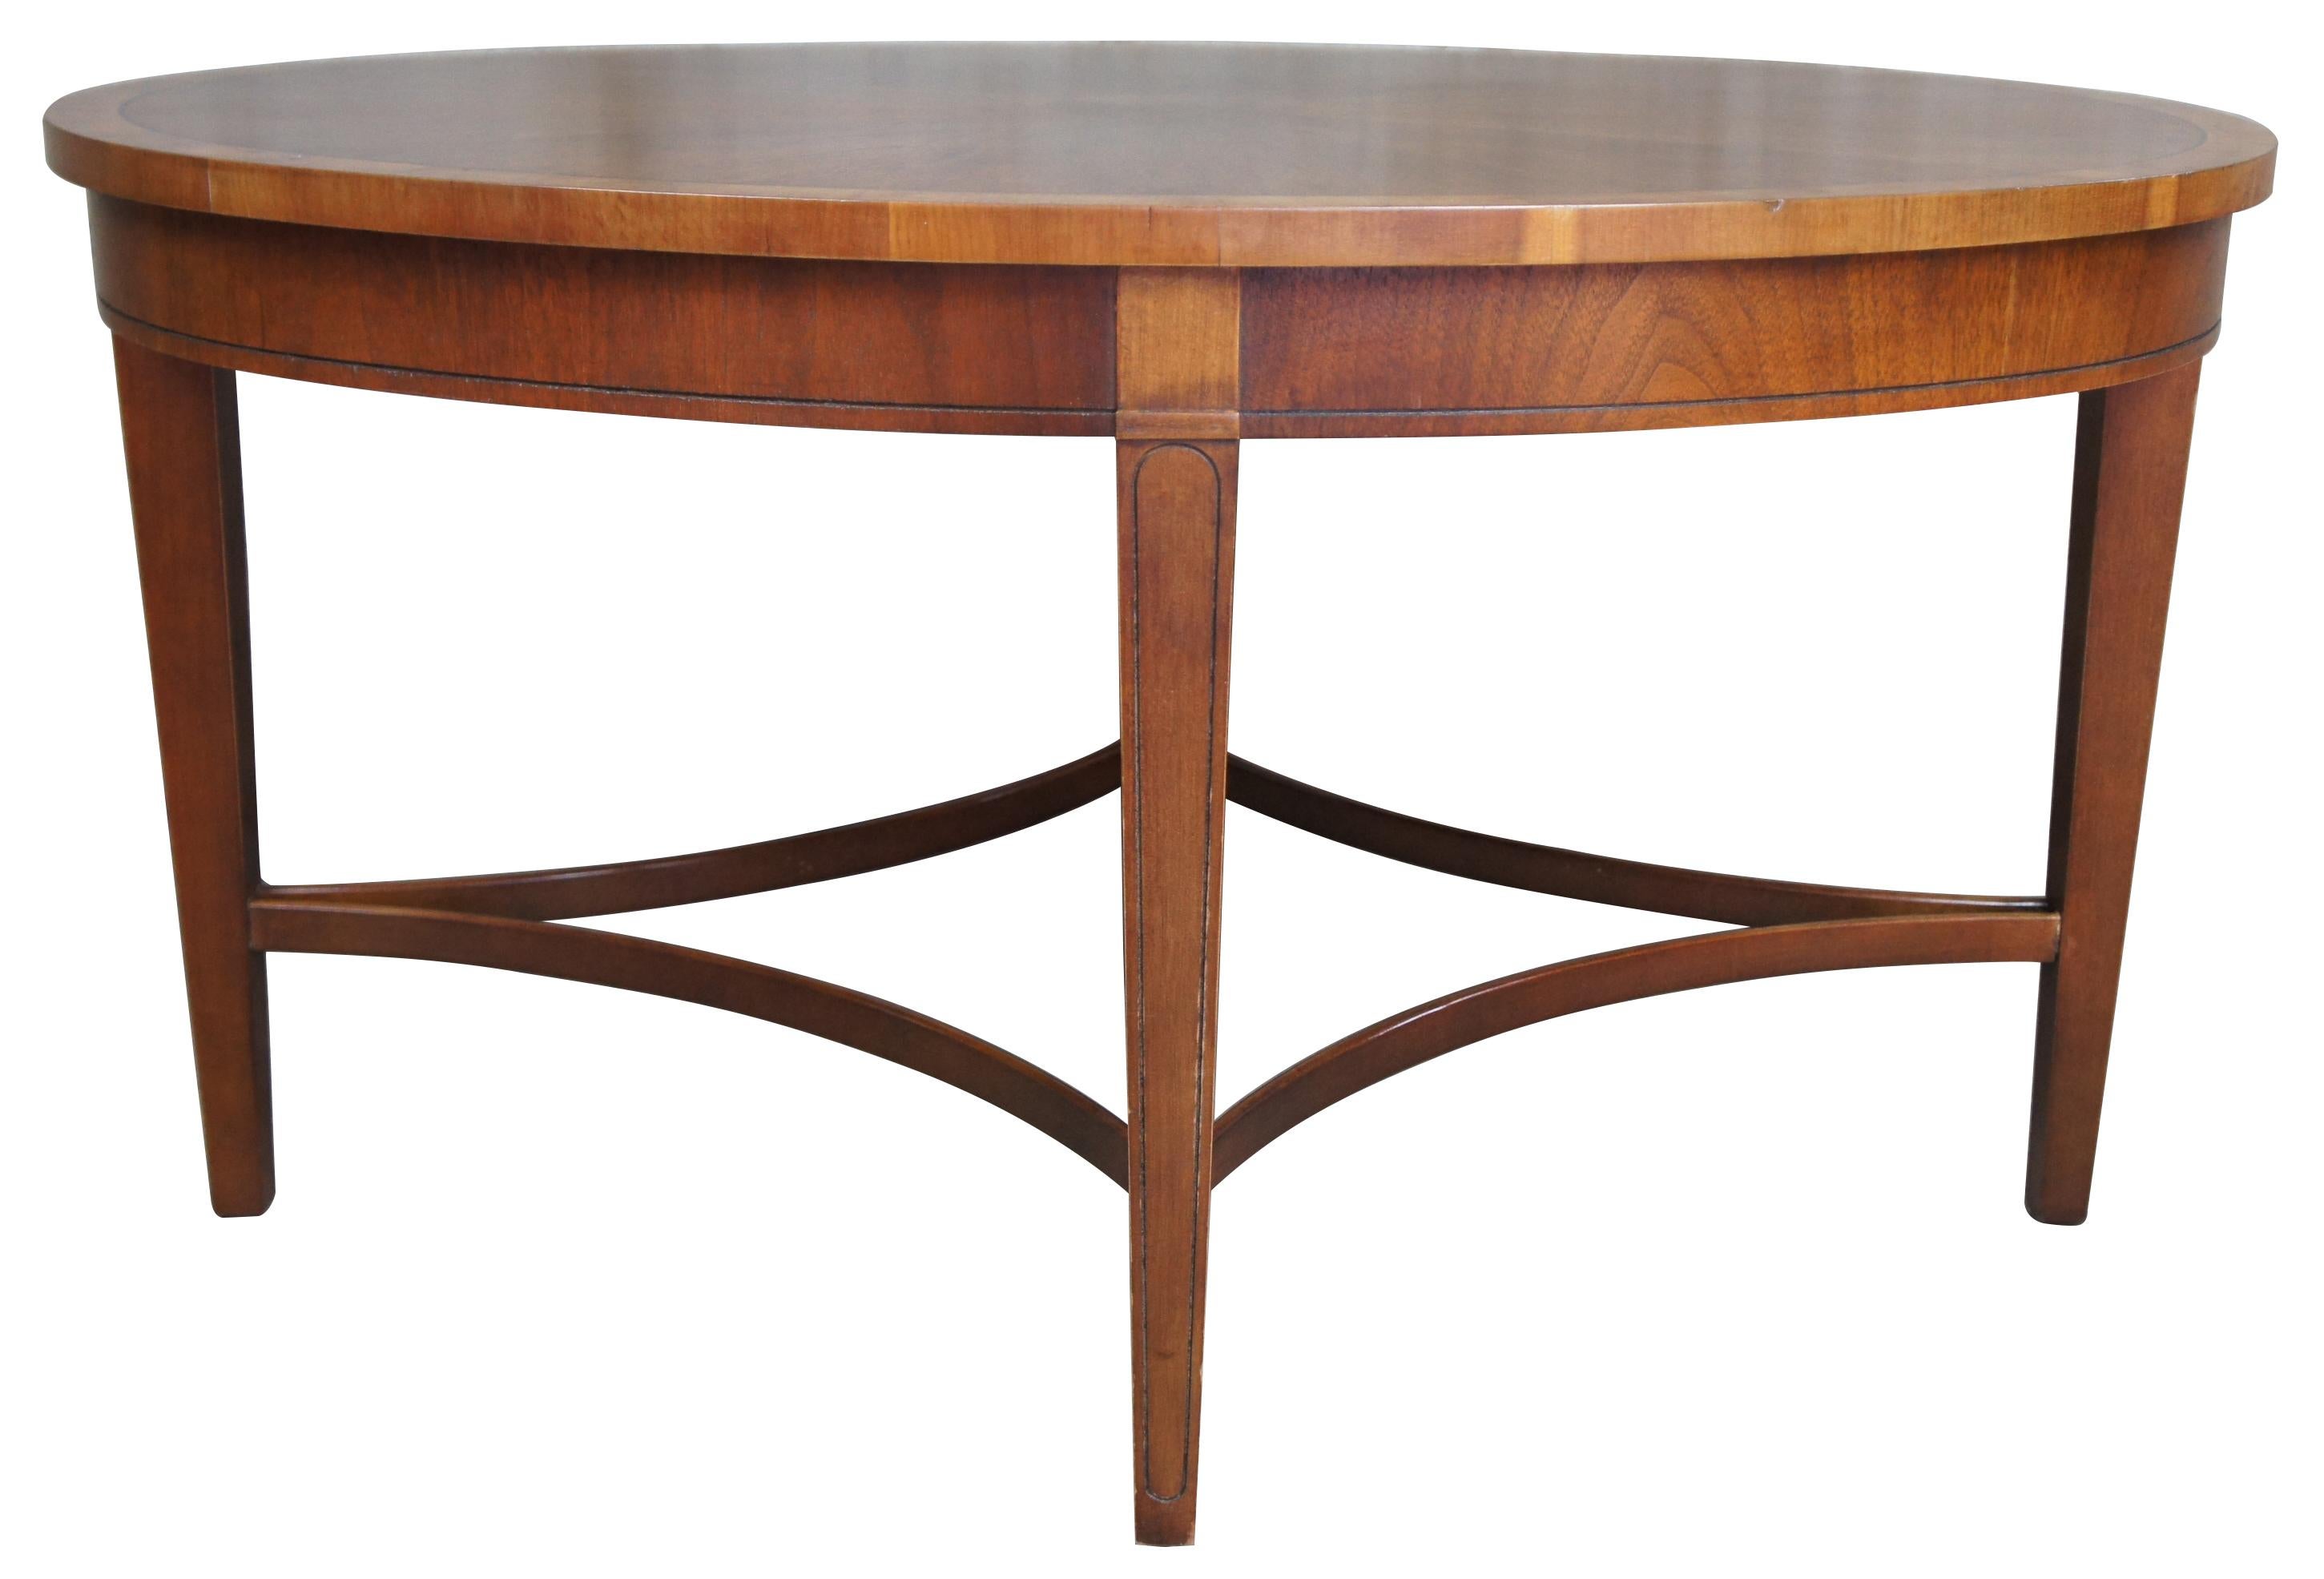 Baker Furniture Laura Ashley inlaid mahogany burl wood coffee table Sheraton

Oval shaped with banded top, made from mahogany with burl wood center. Tapered legs are connected by bentwood stretchers.